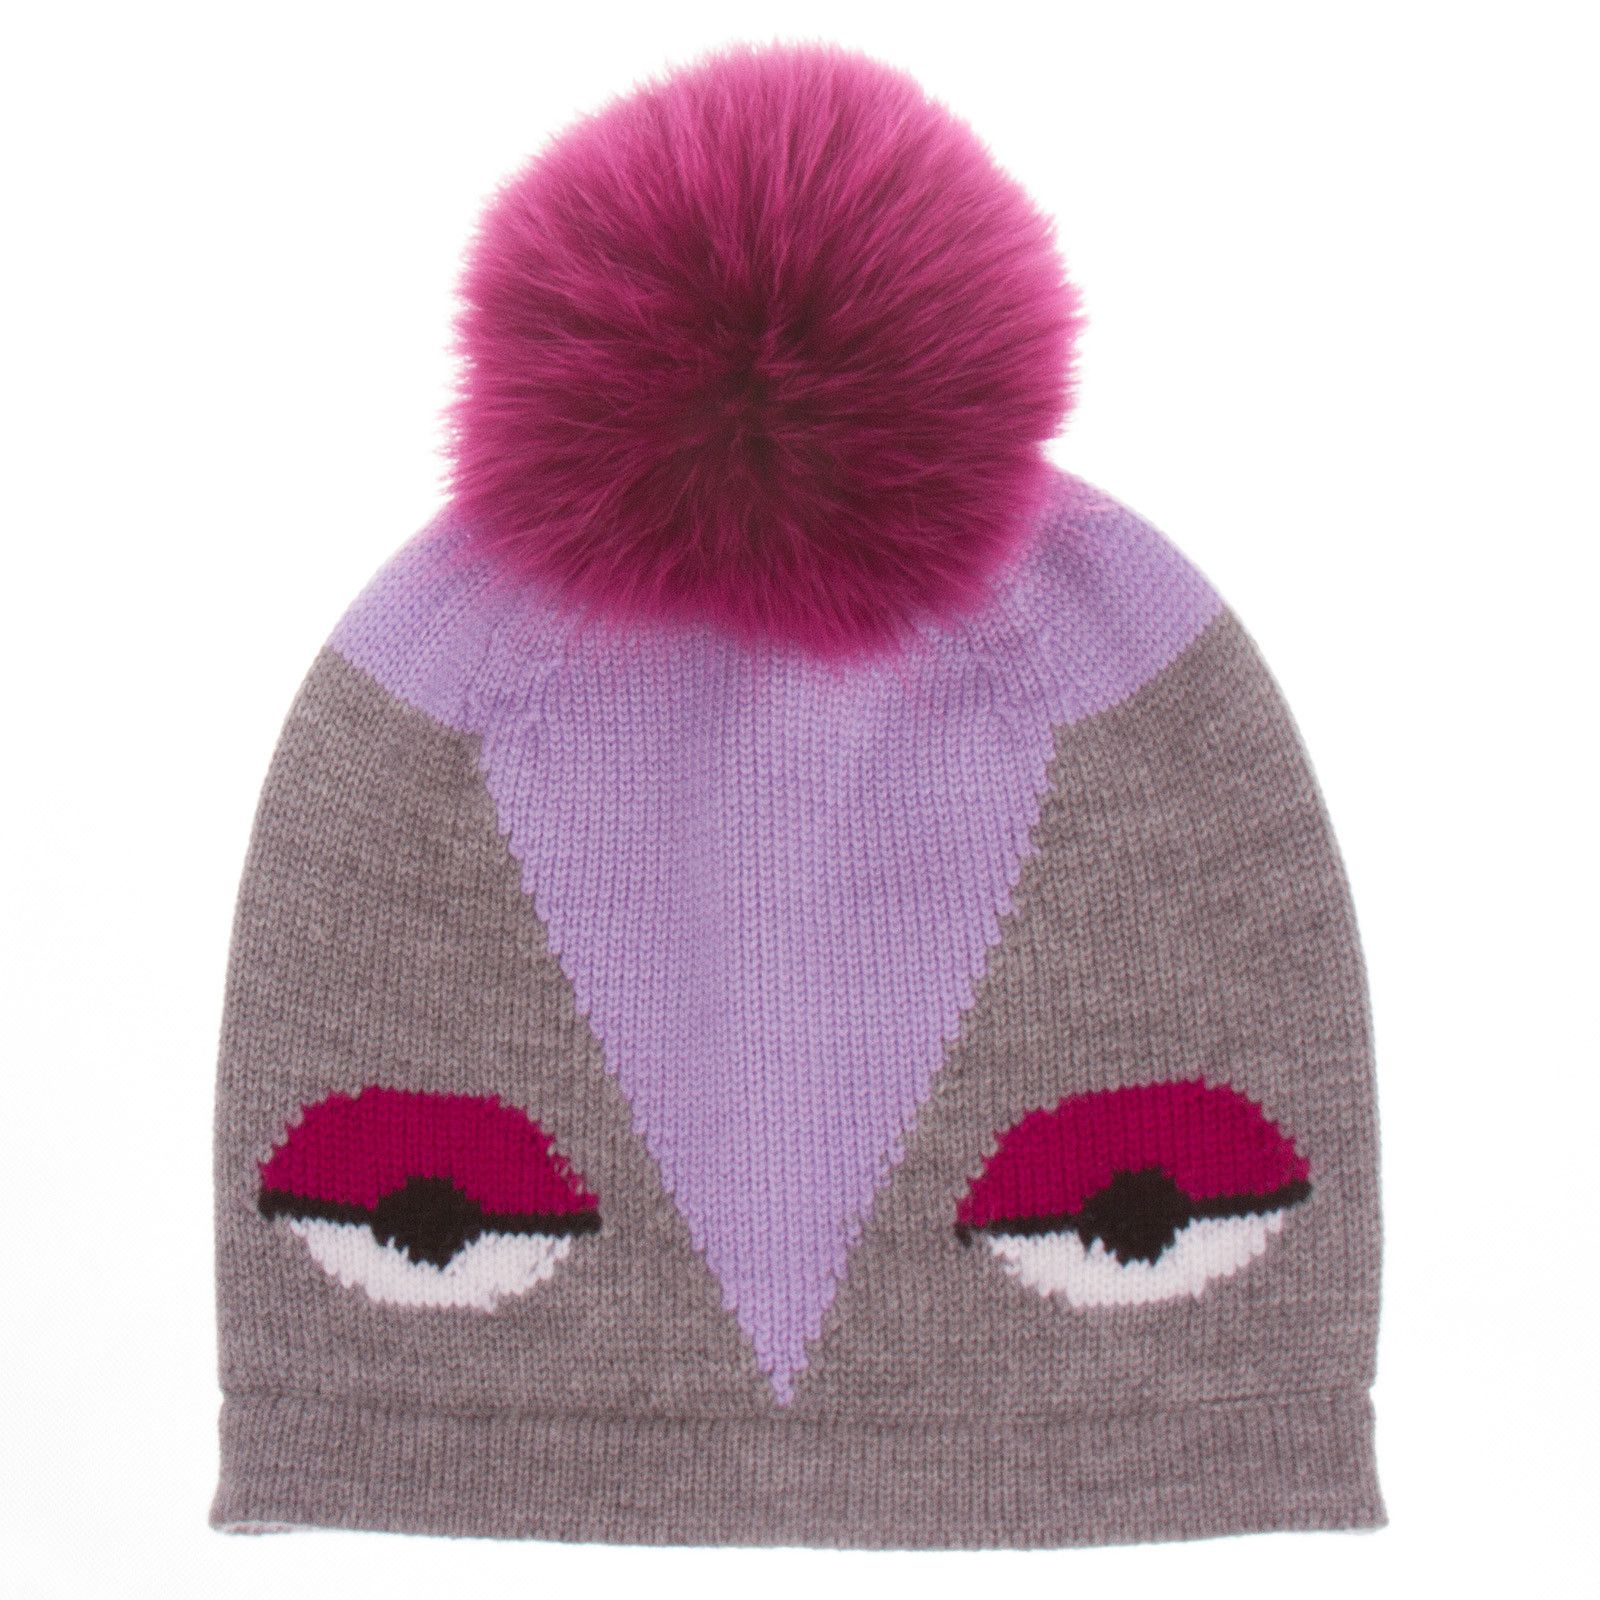 Girls Grey Monster Wool Hat With Red Fur Trims - CÉMAROSE | Children's Fashion Store - 1